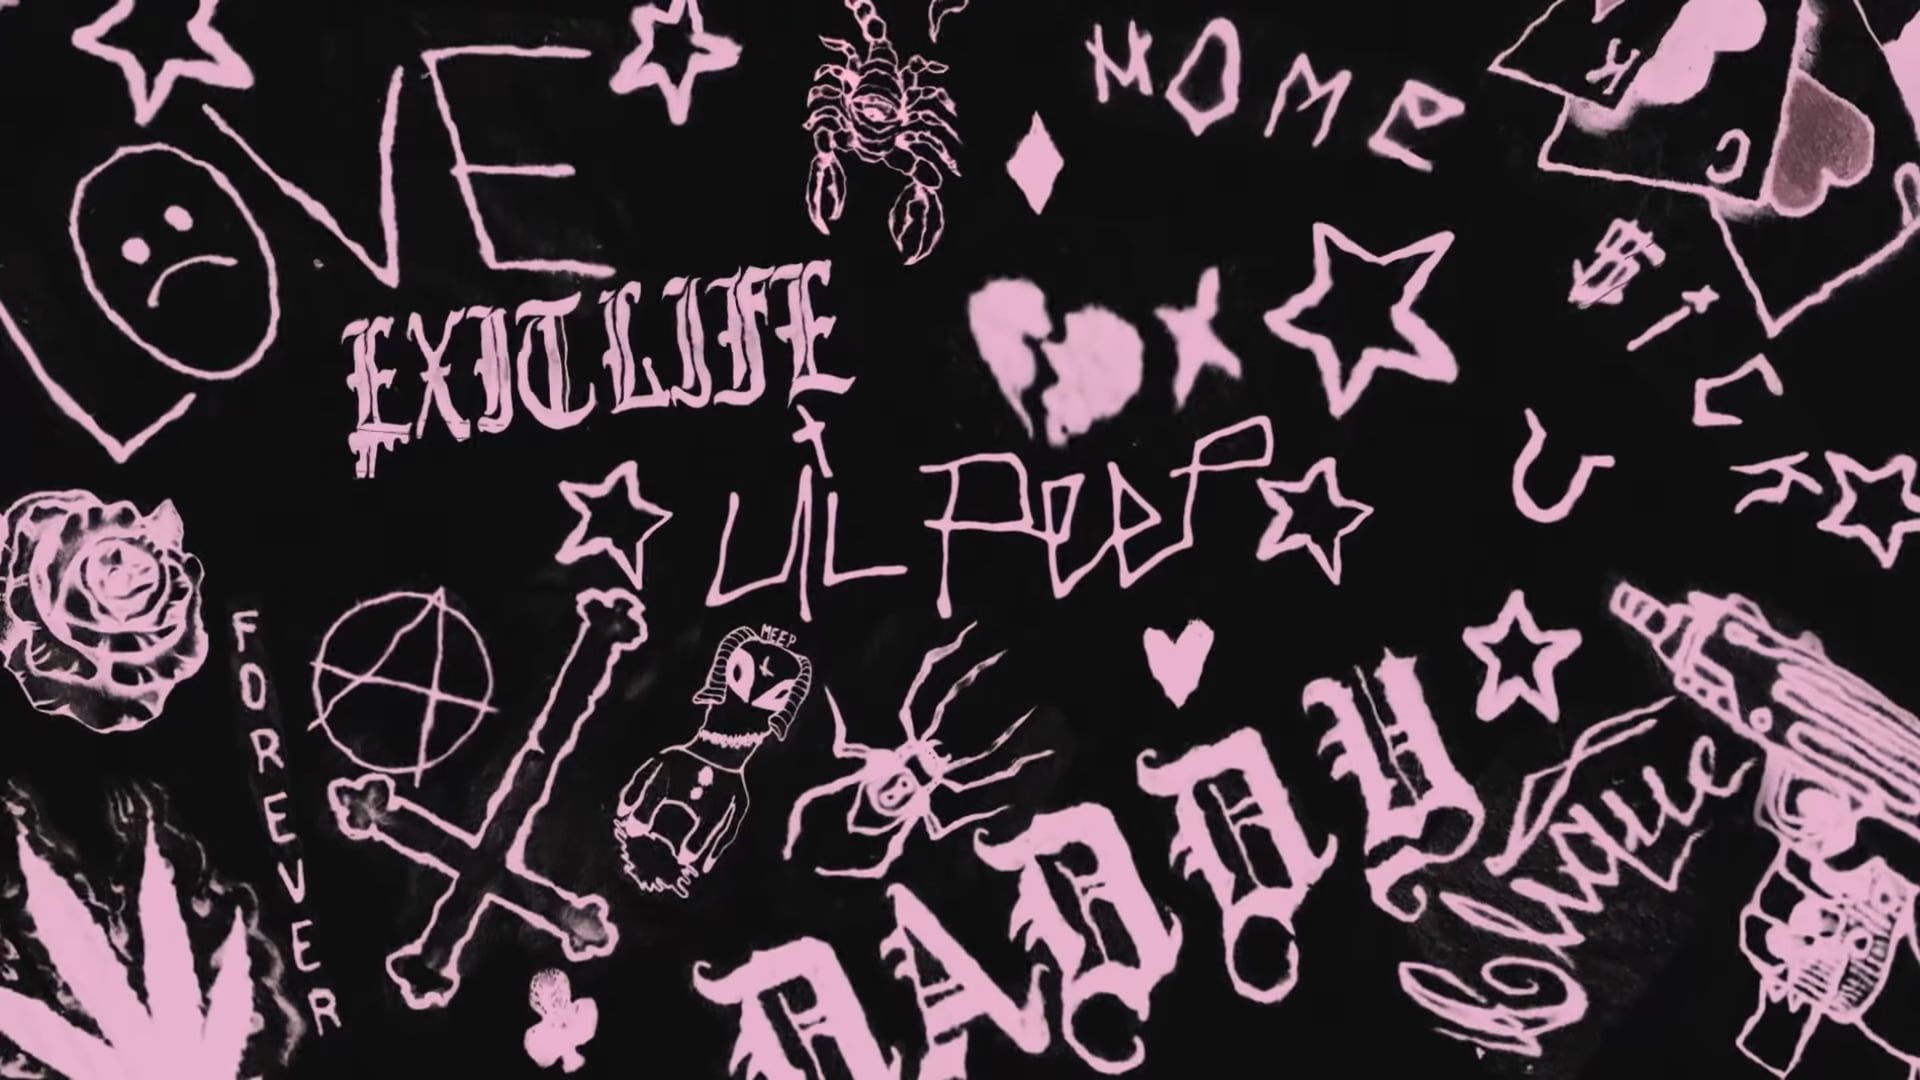 A black background with pink writing on it - Gothic, Lil Peep